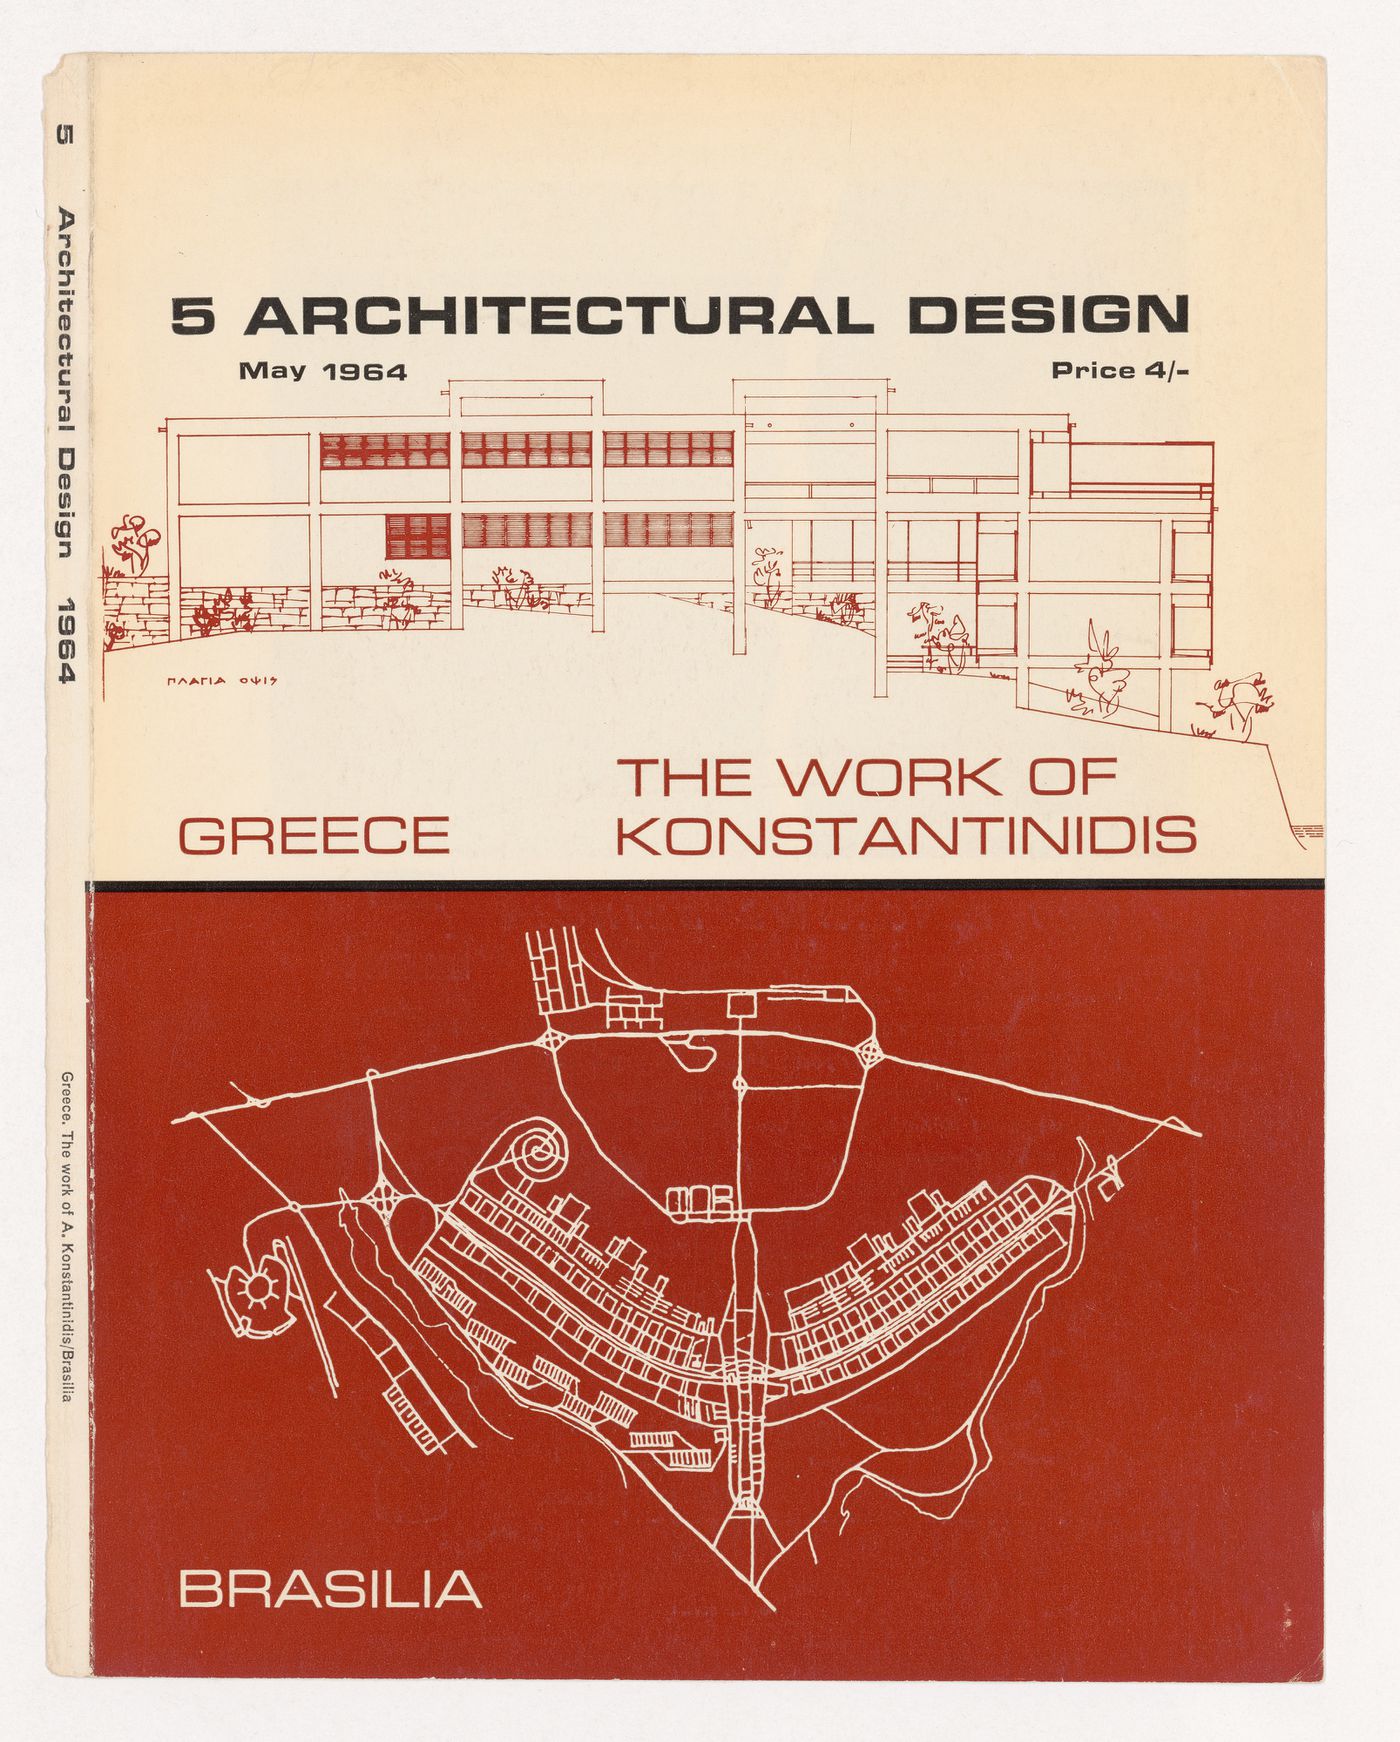 Cover of Architectural Design, May 1964 issue